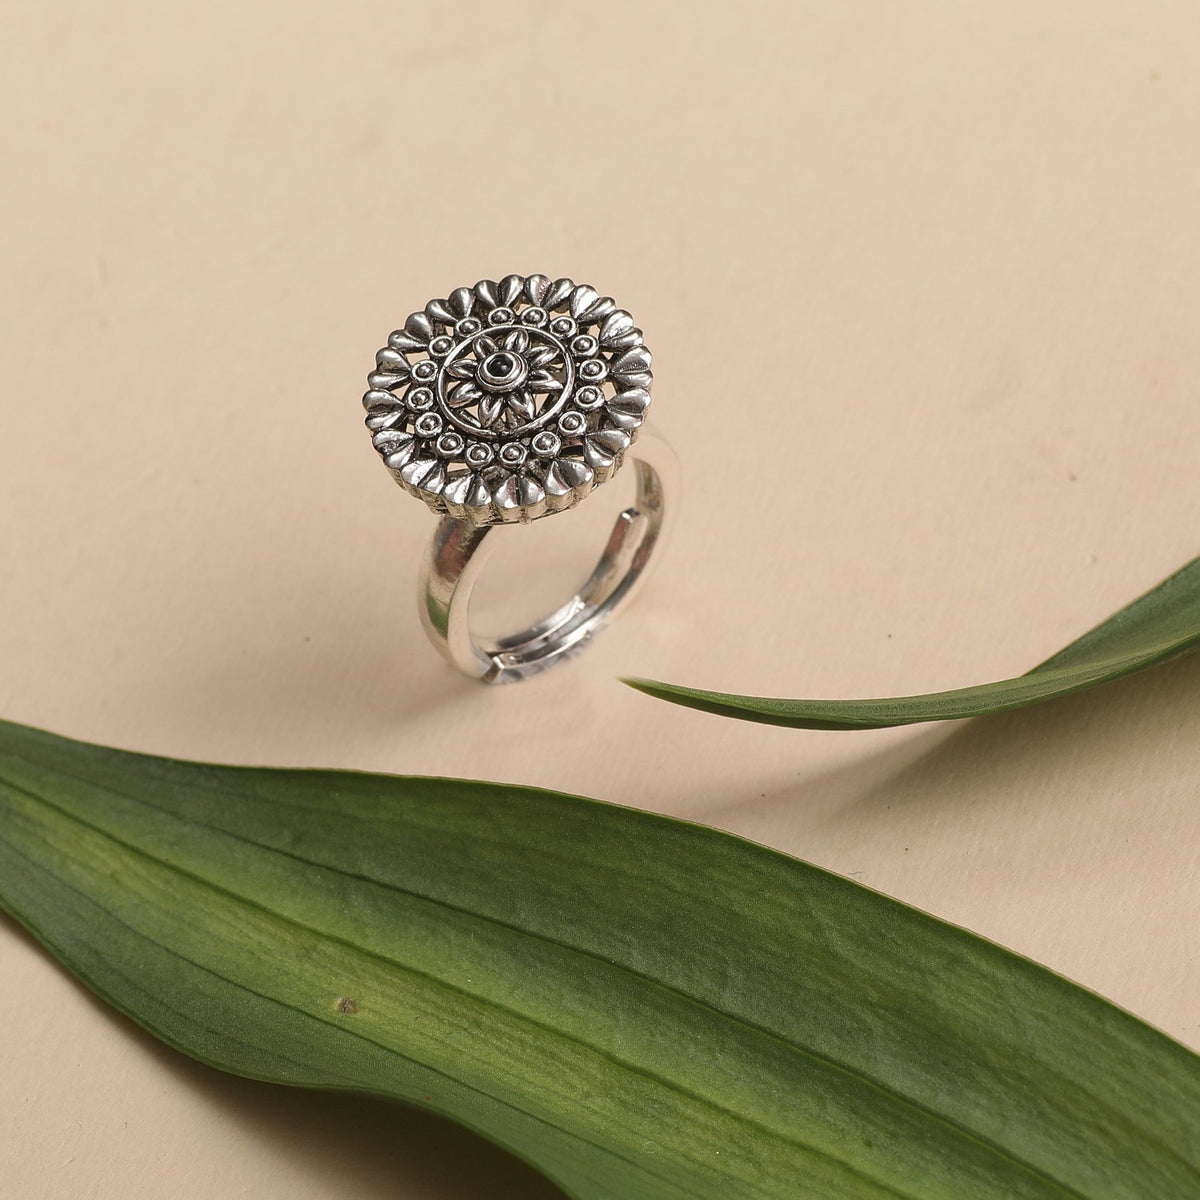 Maati Floral Antique Oxidized Ring